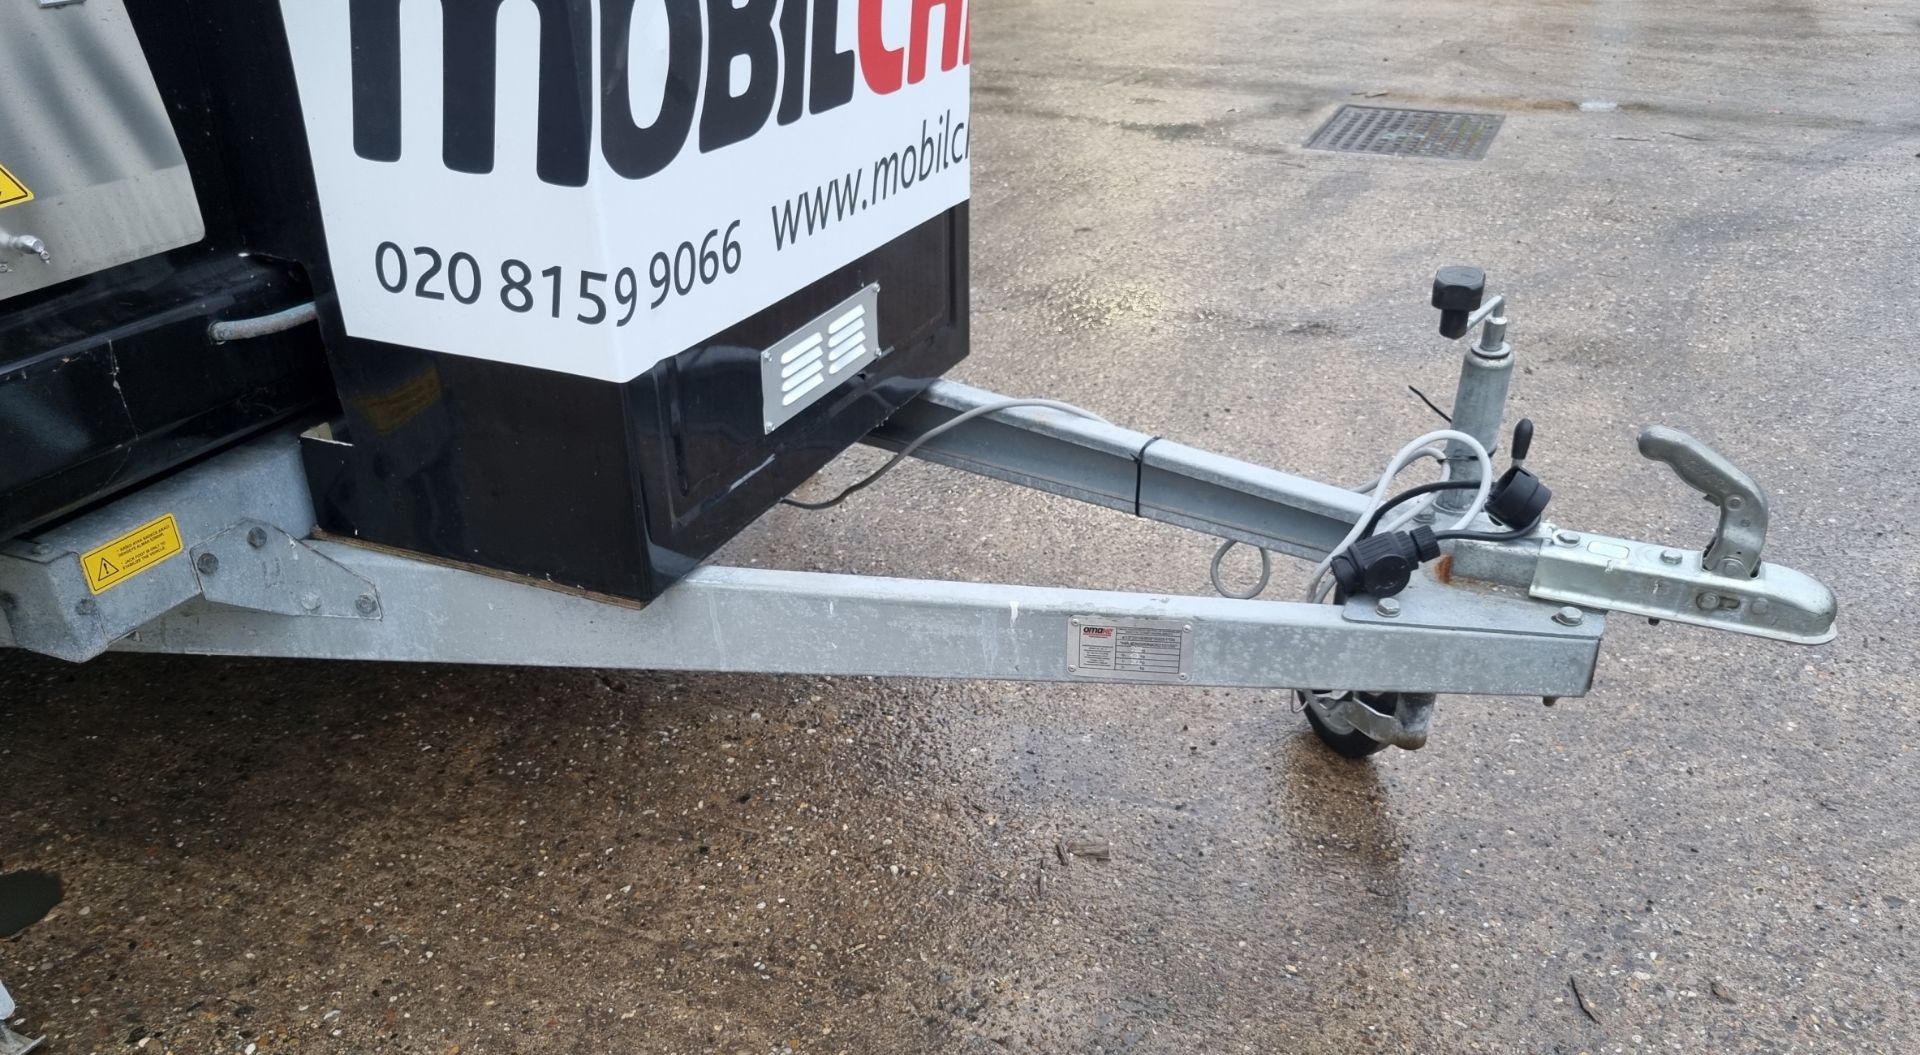 Omake single axle mobile catering trailer - 2018 - 750kg weight - W 3500 x D 2000 x H 3300 mm - Image 12 of 38